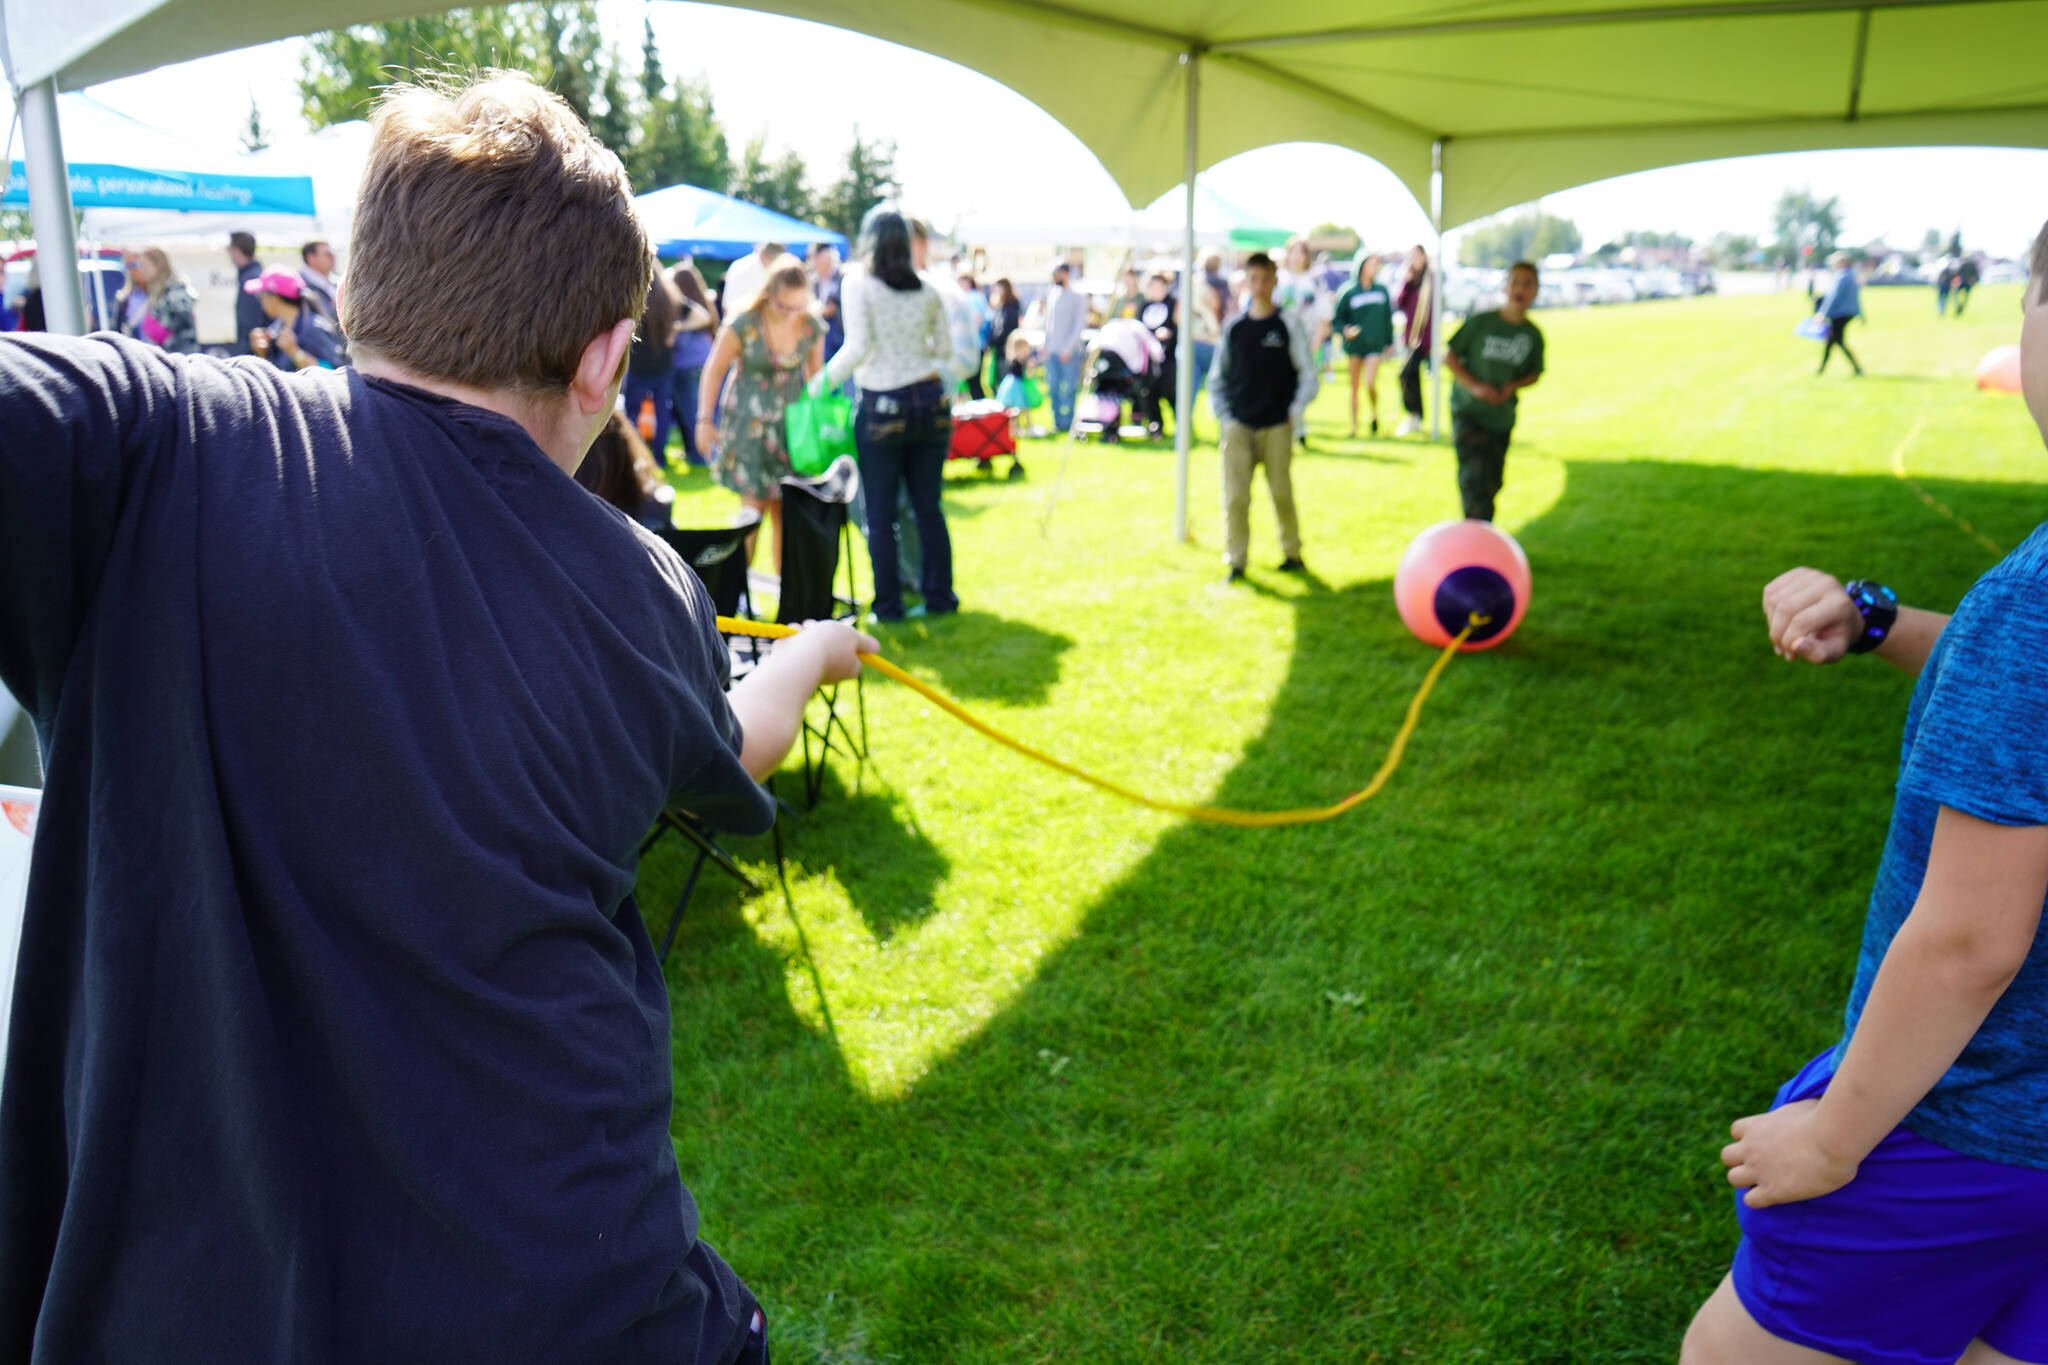 Bowe Meyers practices for the net pull competition, part of Industry Appreciation Day festivities at the Kenai softball greenstrip on Saturday, Aug. 19, 2023. (Jake Dye/Peninsula Clarion)